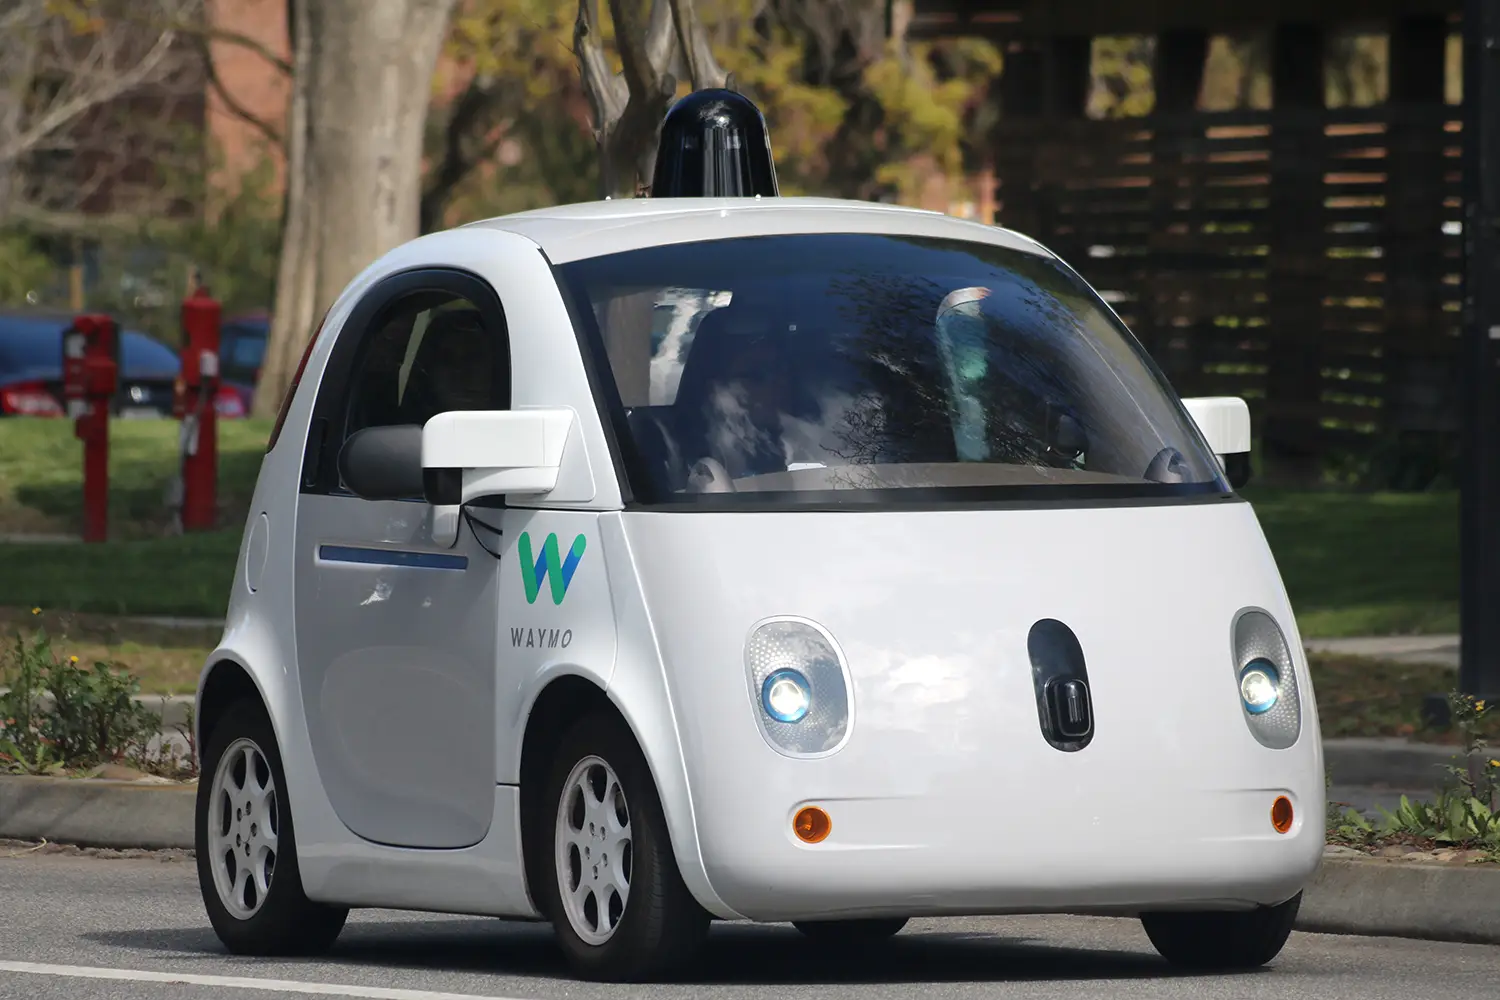 The small, distinctive Waymo car with cameras and sensors mounted to its roof and front side.